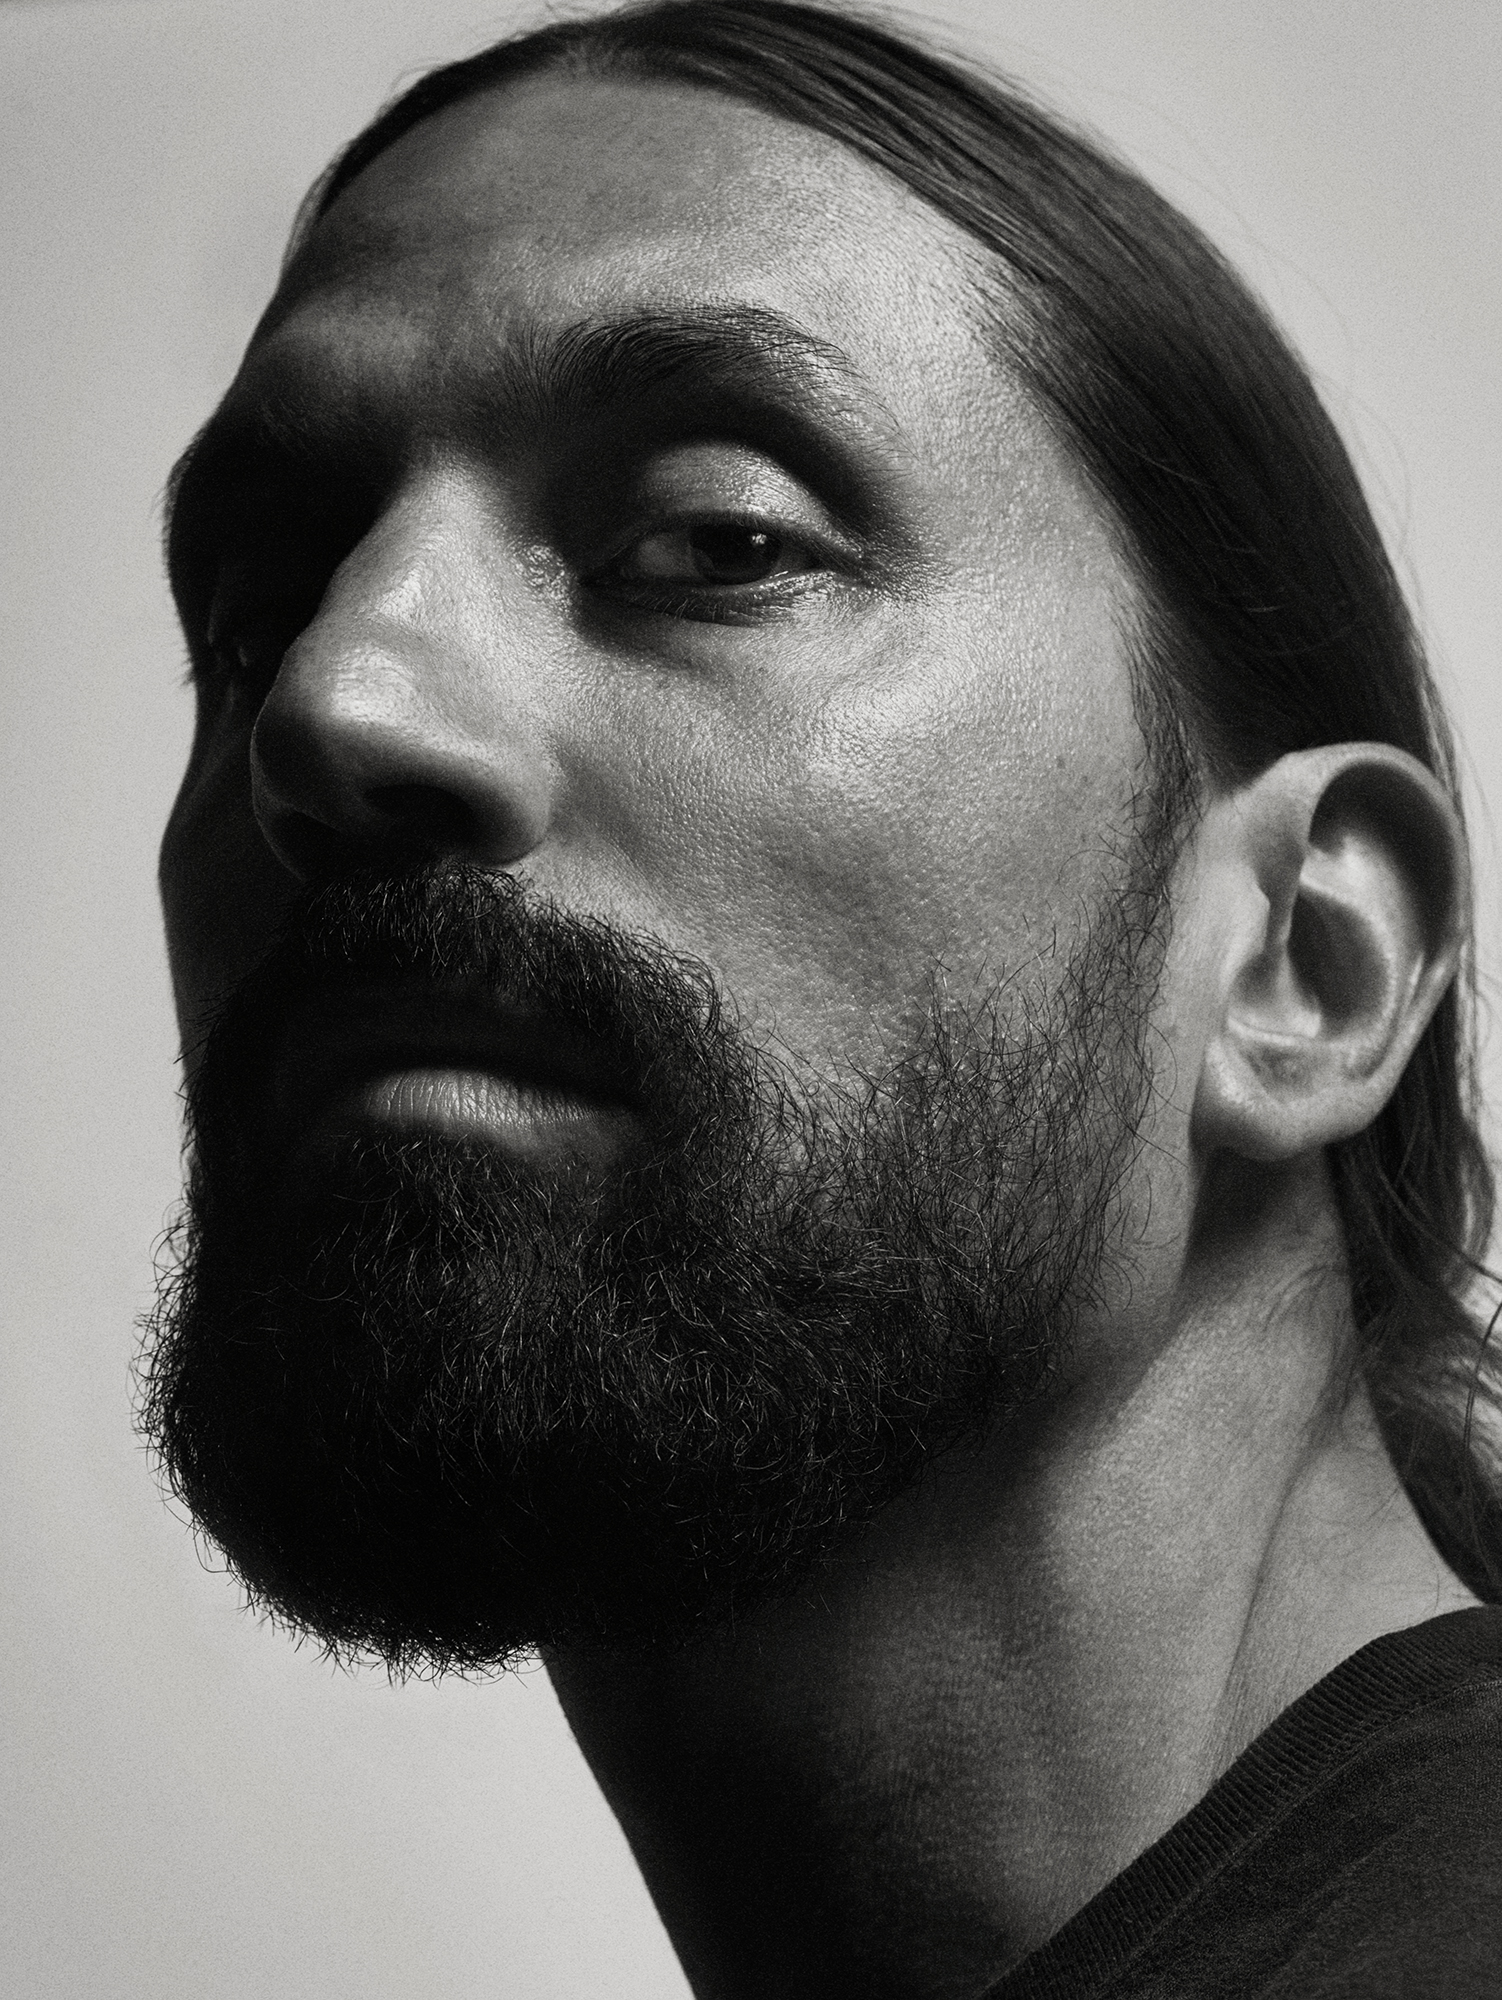 The World of Byredo by Ben Gorham, who Creates Fragrances from Memories